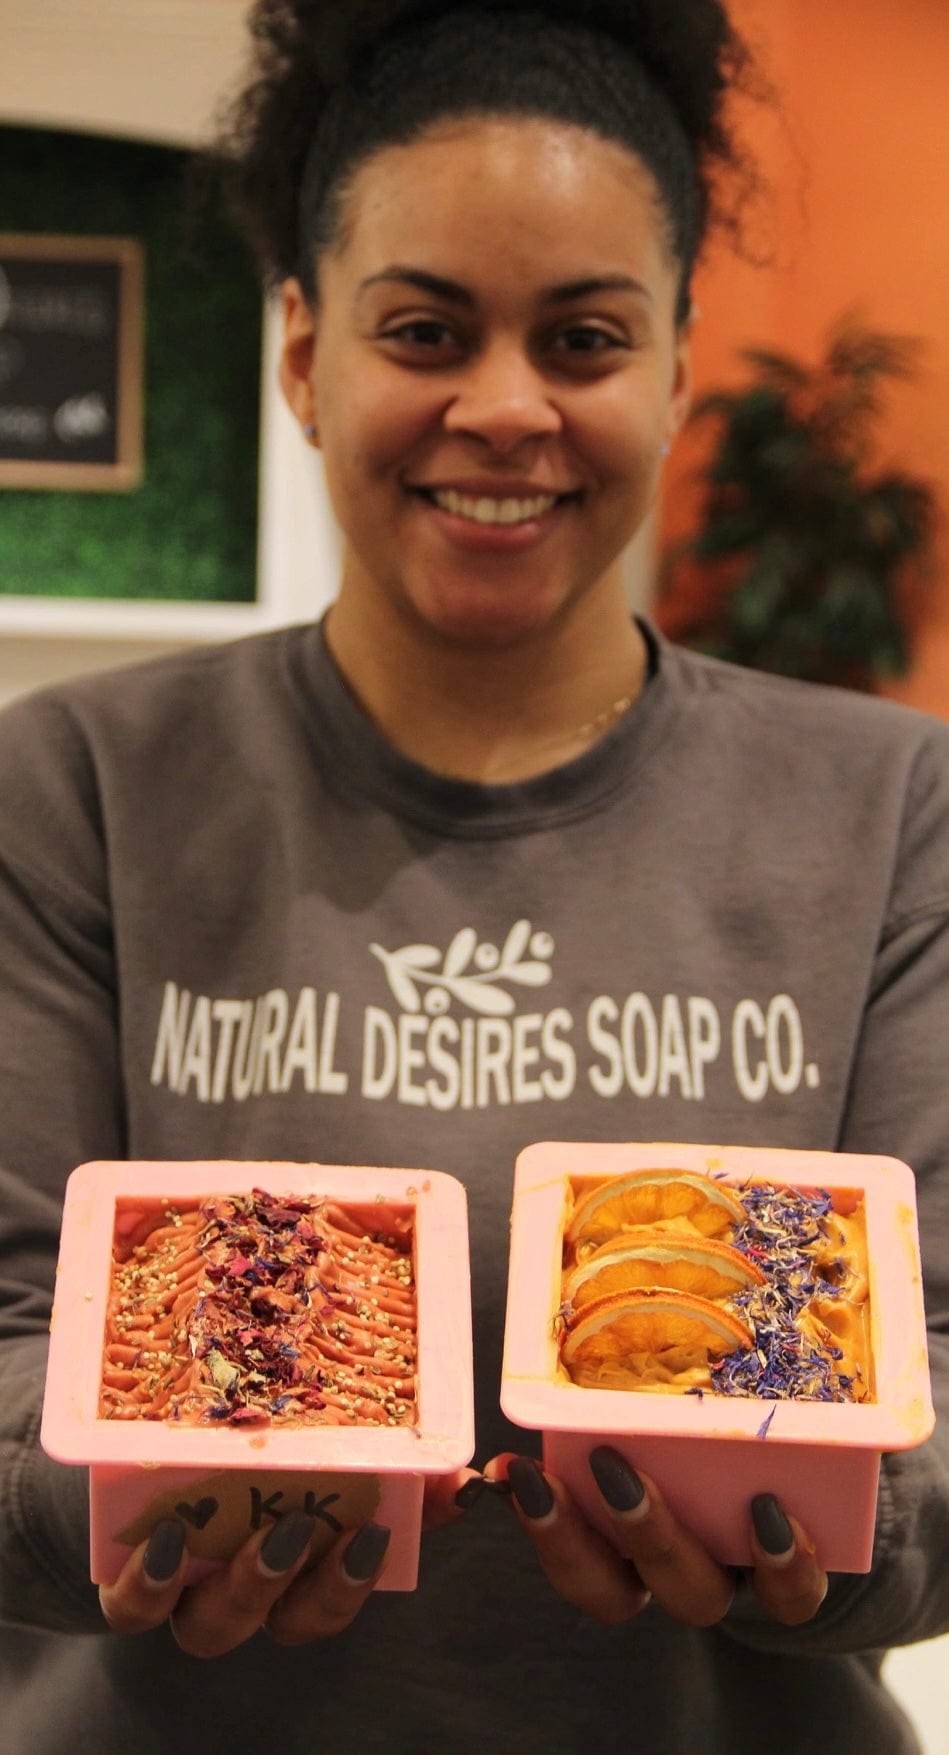 Soap Making Class March 2nd 2:00 pm